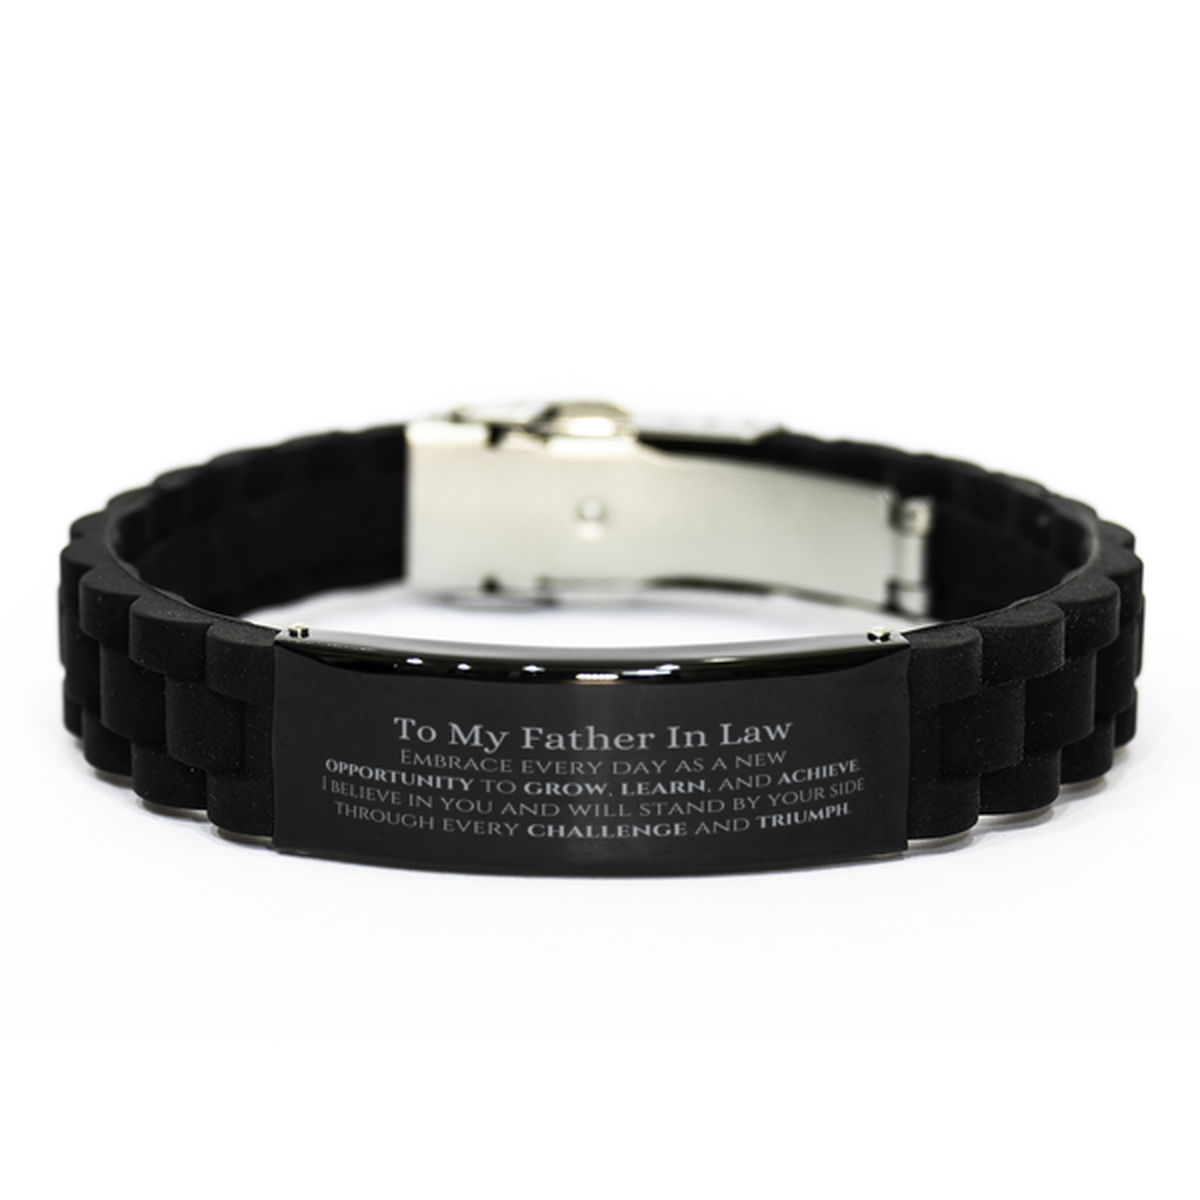 To My Father In Law Gifts, I believe in you and will stand by your side, Inspirational Black Glidelock Clasp Bracelet For Father In Law, Birthday Christmas Motivational Father In Law Gifts